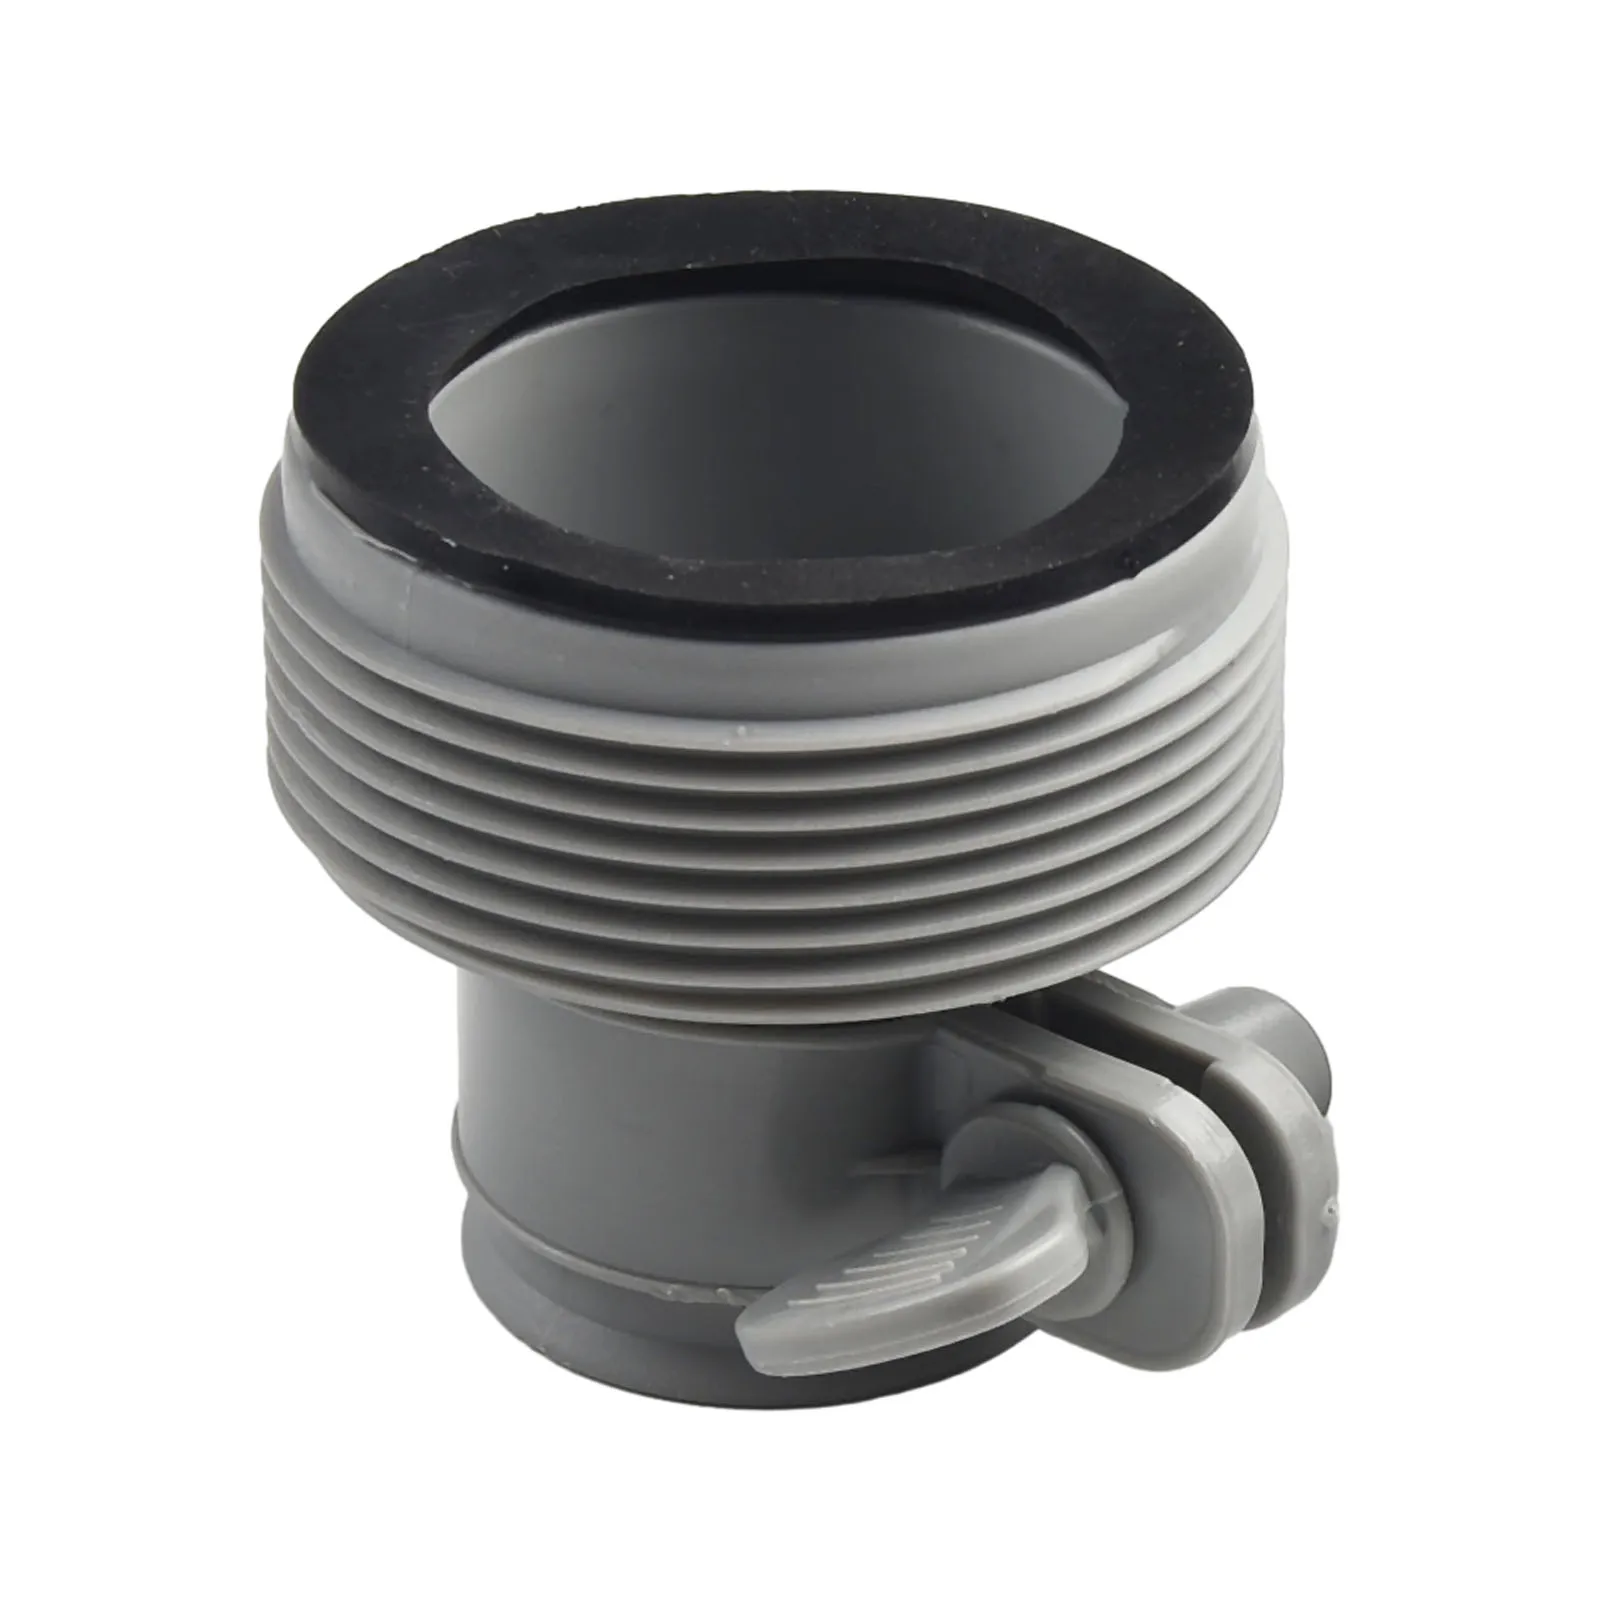 

Durable and Weather resistant For Intex Plunger Valves Gaskets & Nuts + Hose Adapters for Hassle free Pool Maintenance